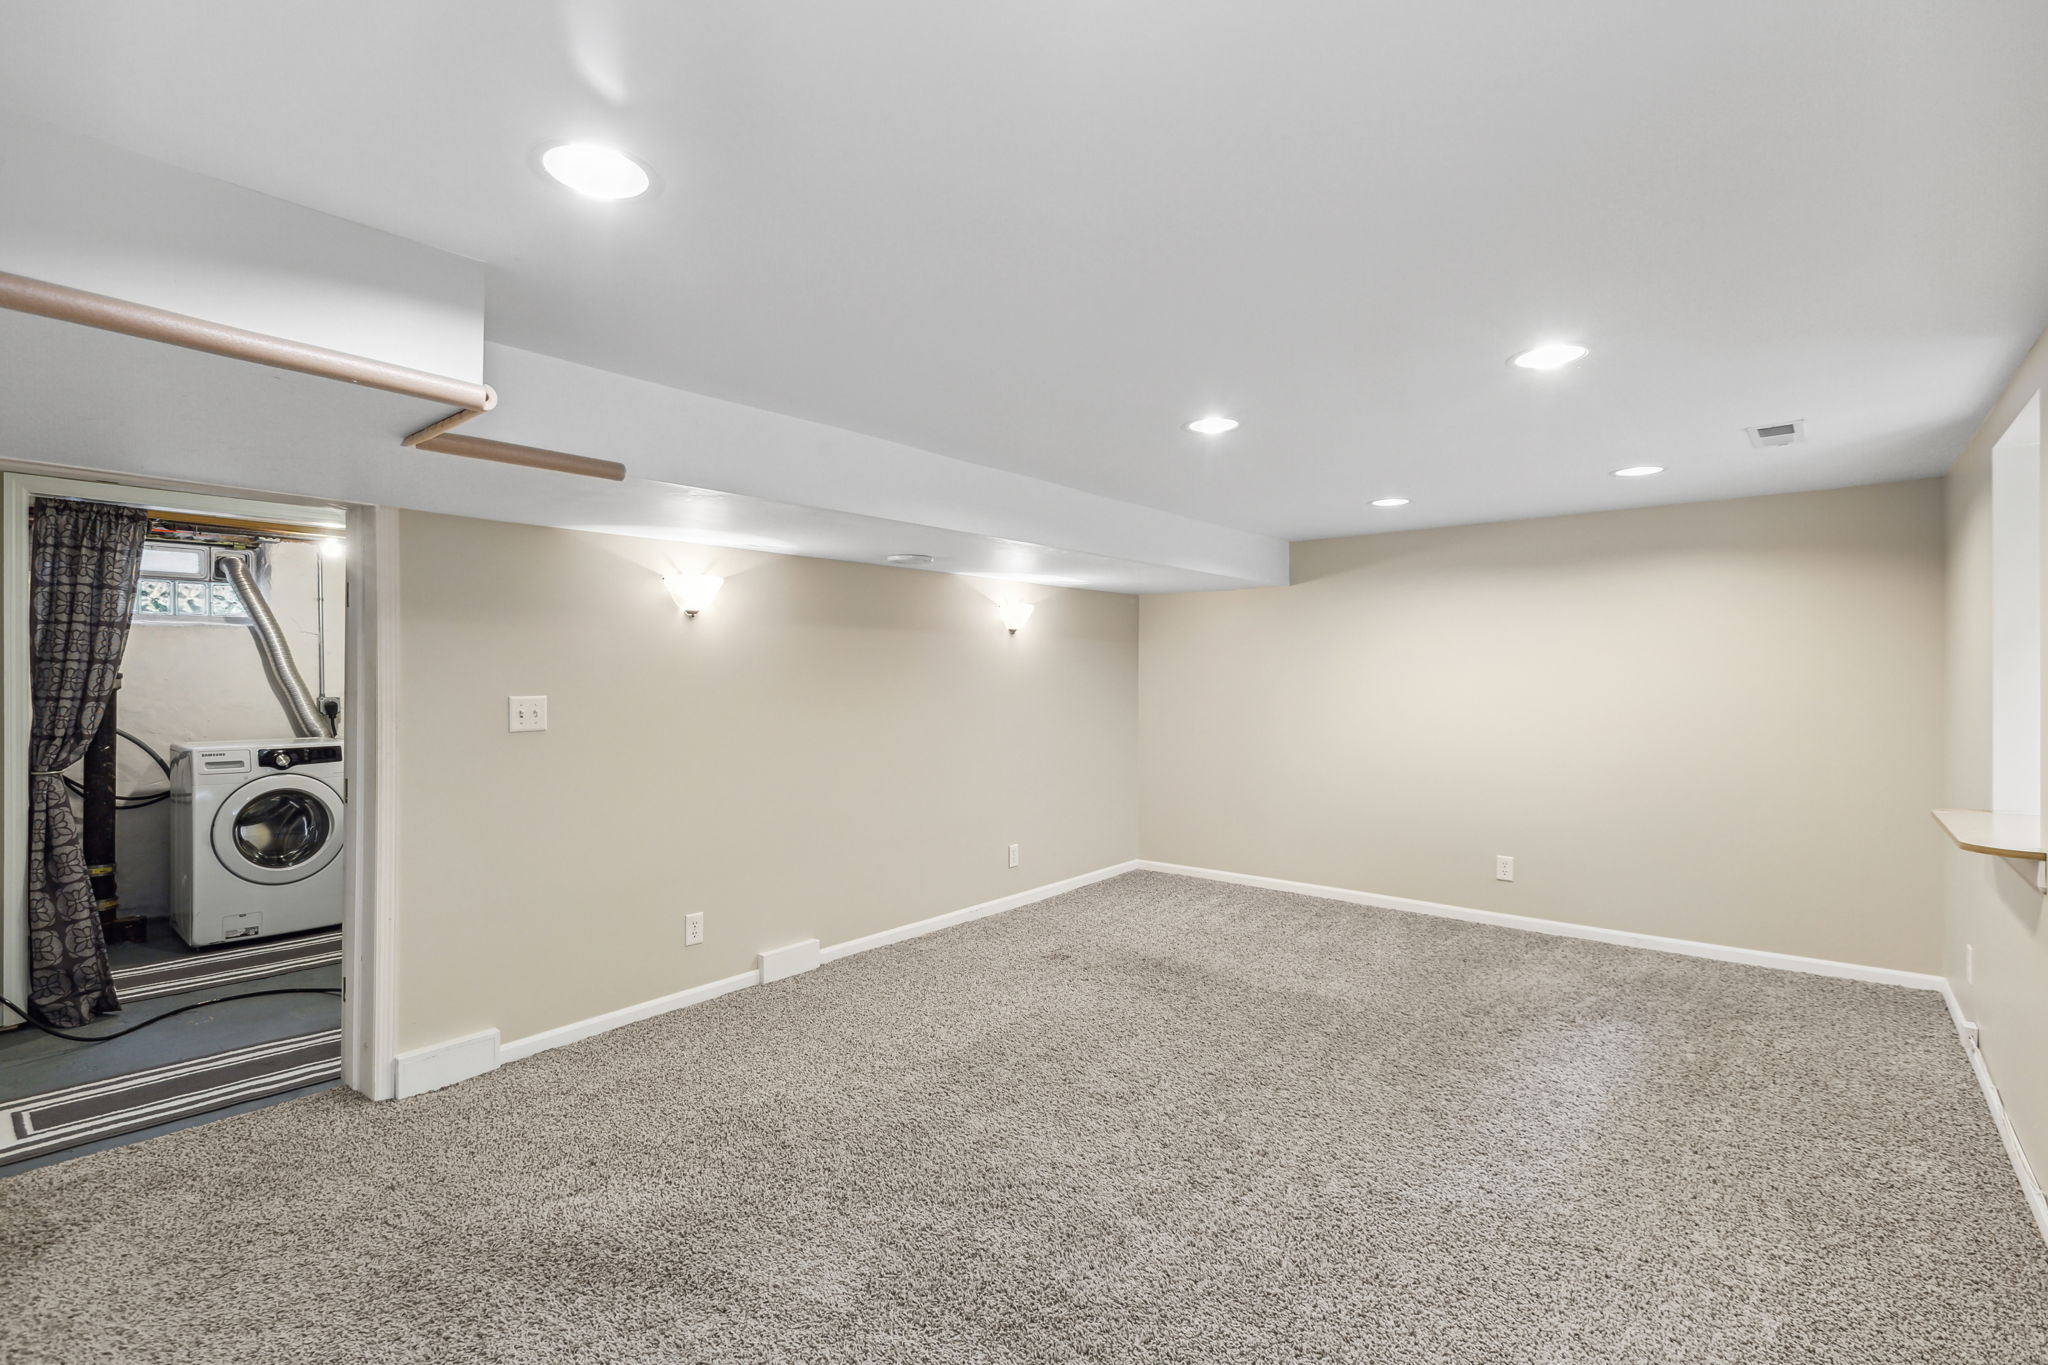 Huge lower level space - lots of options